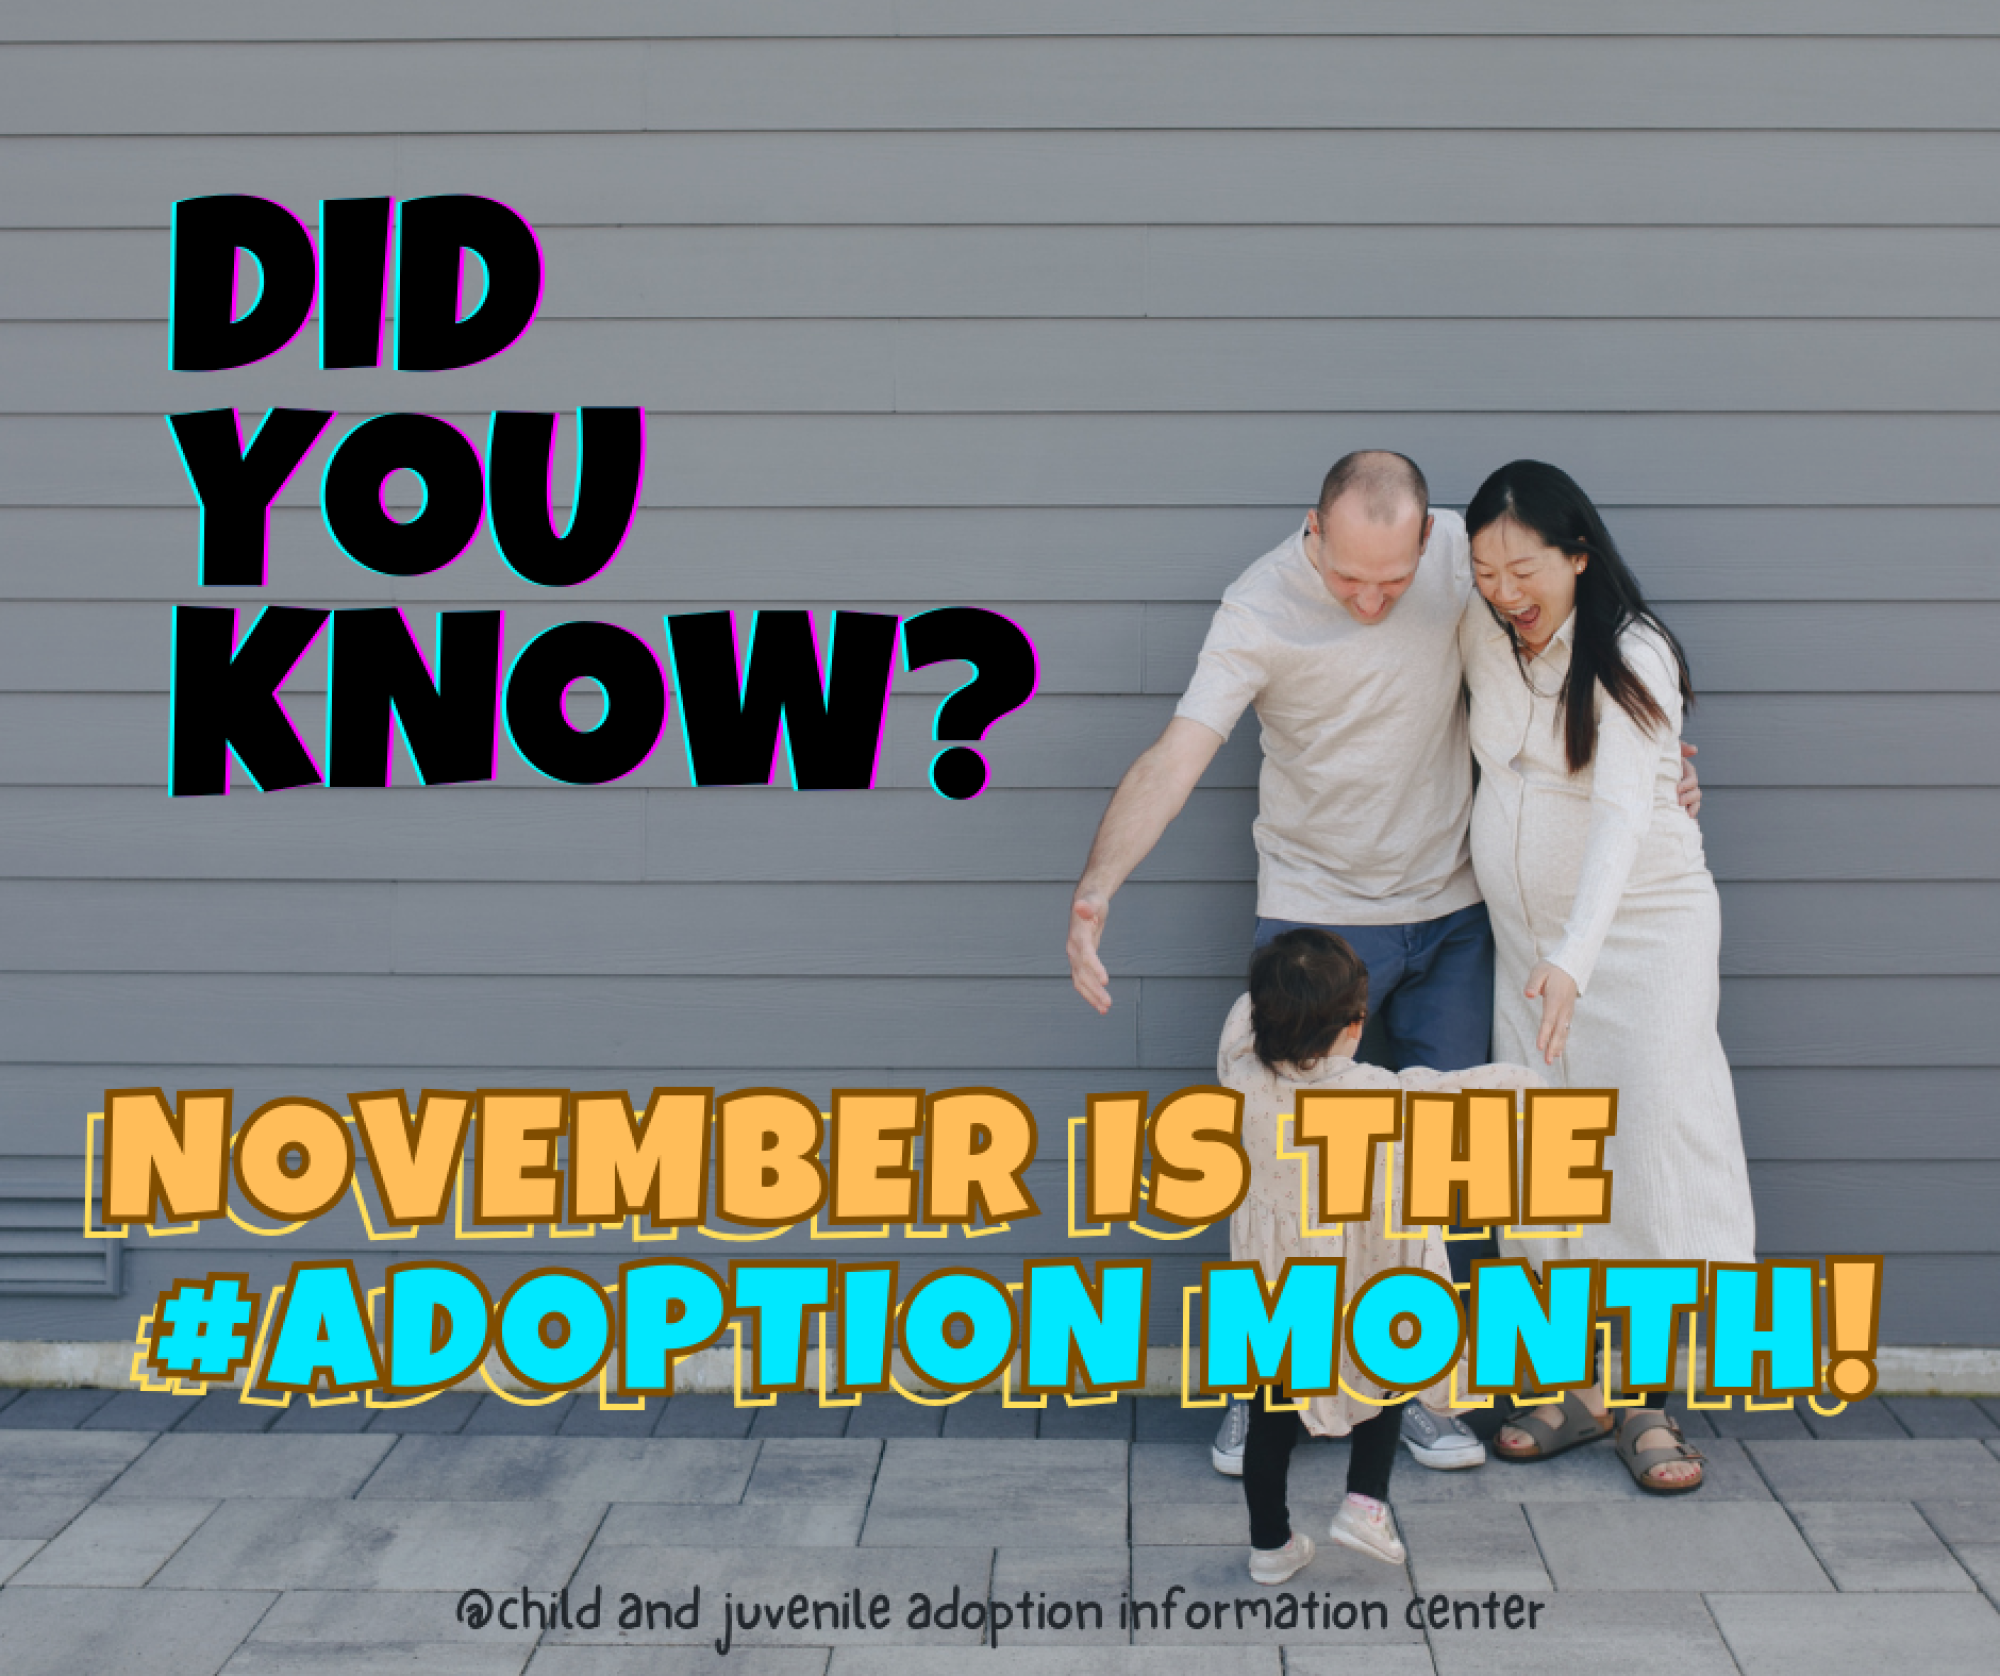 It's November and it's the Adoption Month!